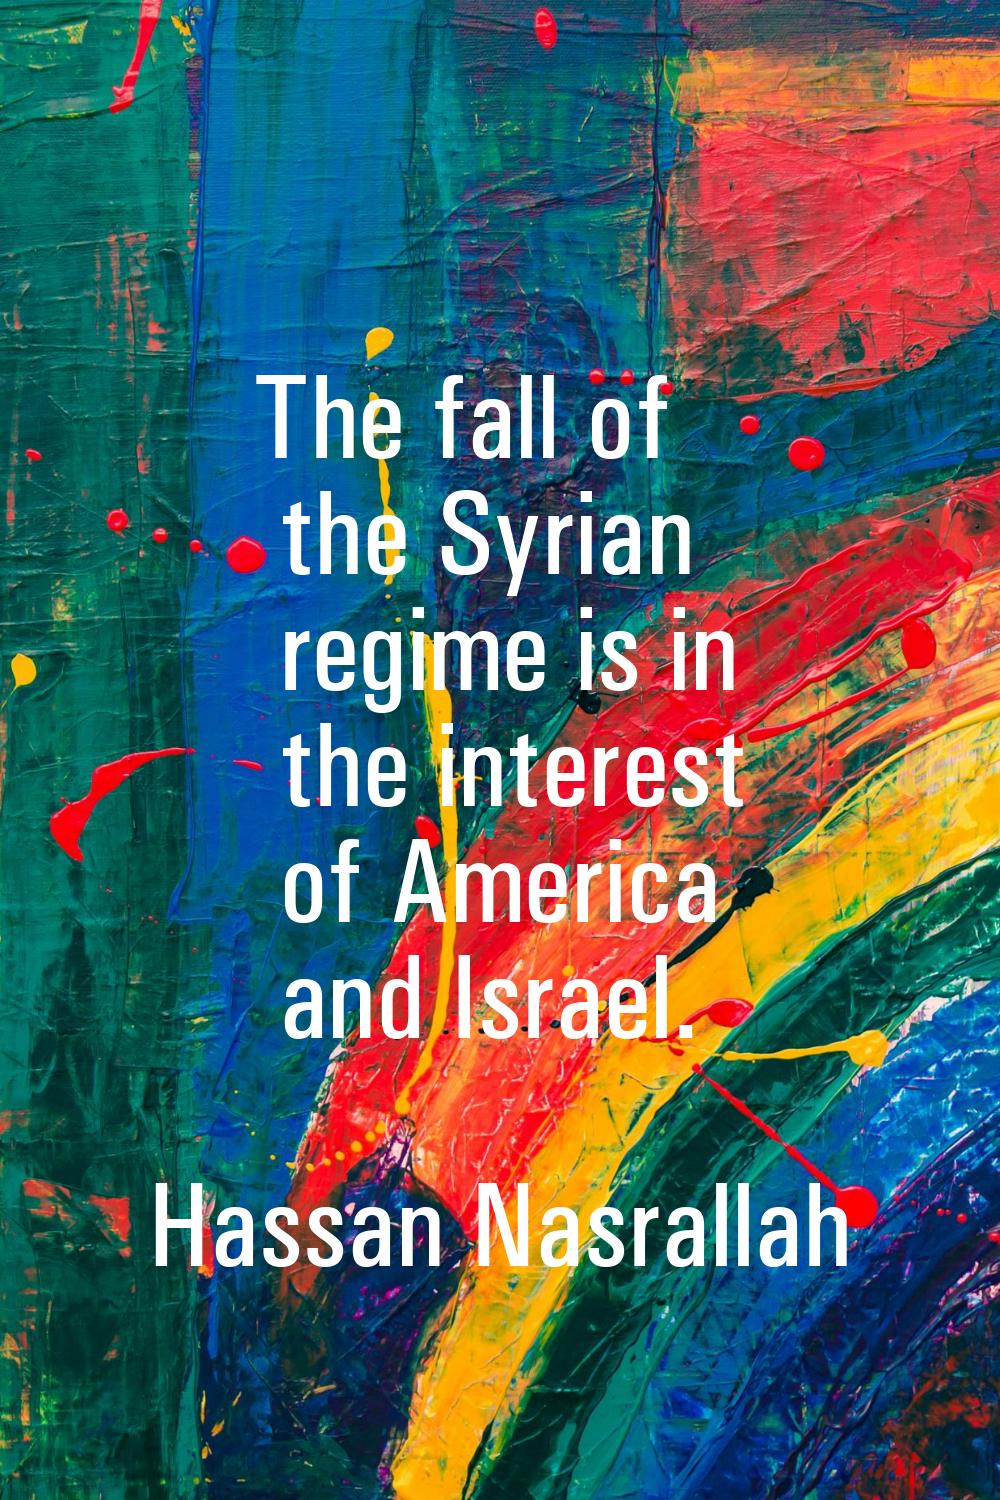 The fall of the Syrian regime is in the interest of America and Israel.